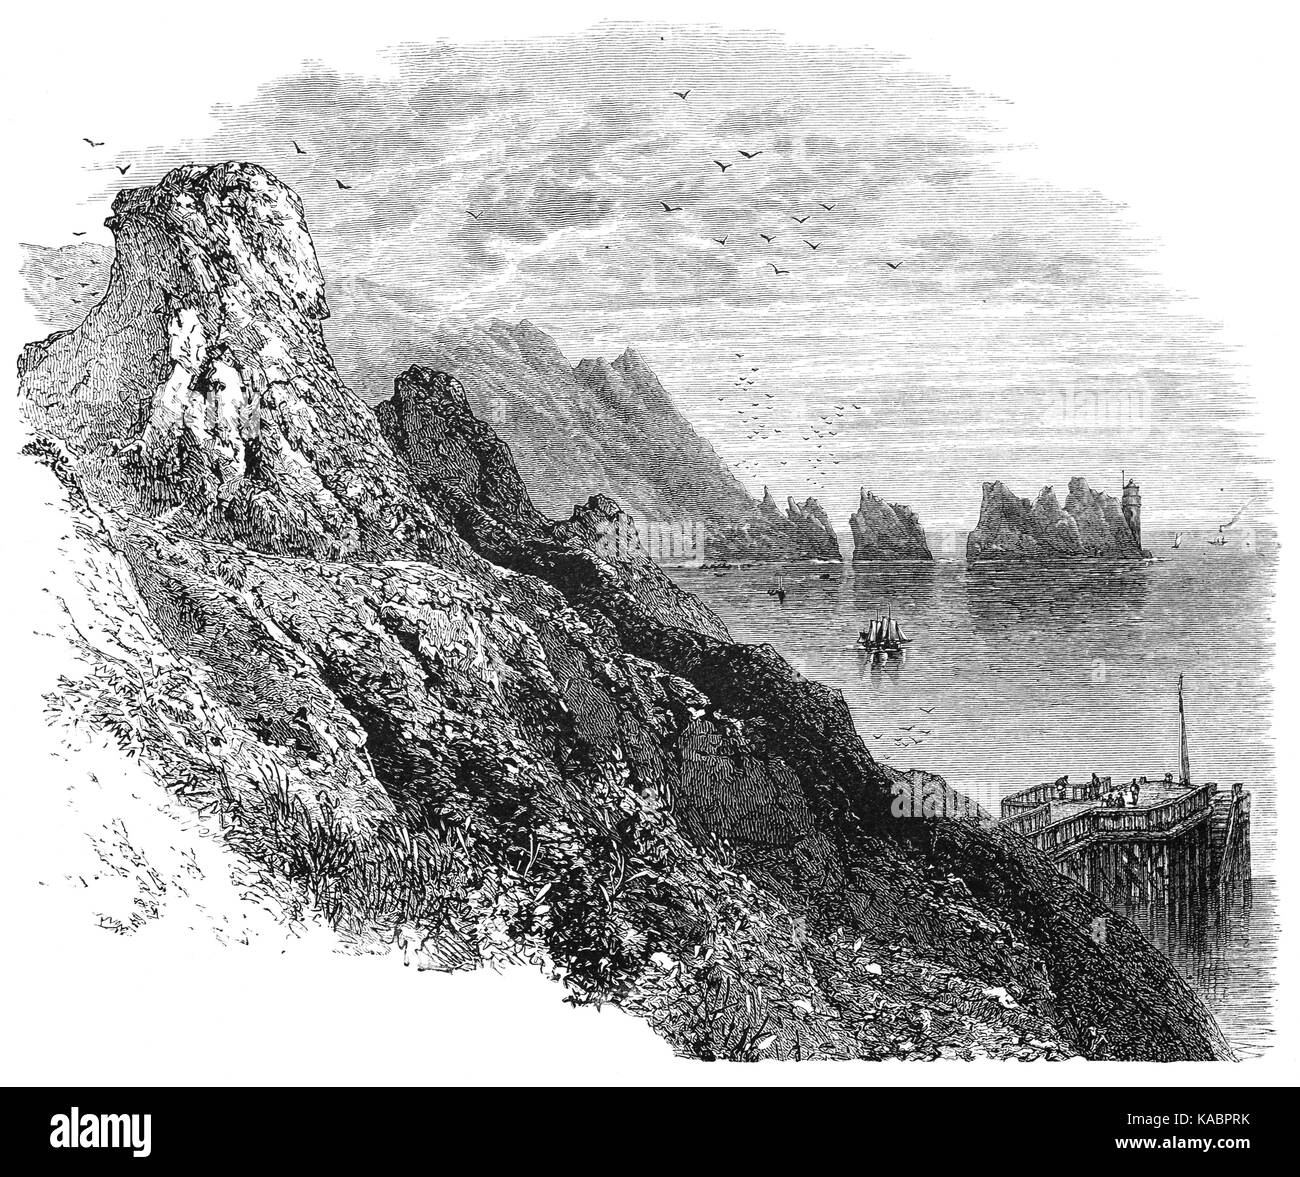 1870: The Needles is a row of three distinctive stacks of chalk that rise about 100 feet out of the sea off the western extremity of the Isle of Wight, United Kingdom, close to Alum Bay, and part of Totland, Isle of Wight, England. Stock Photo